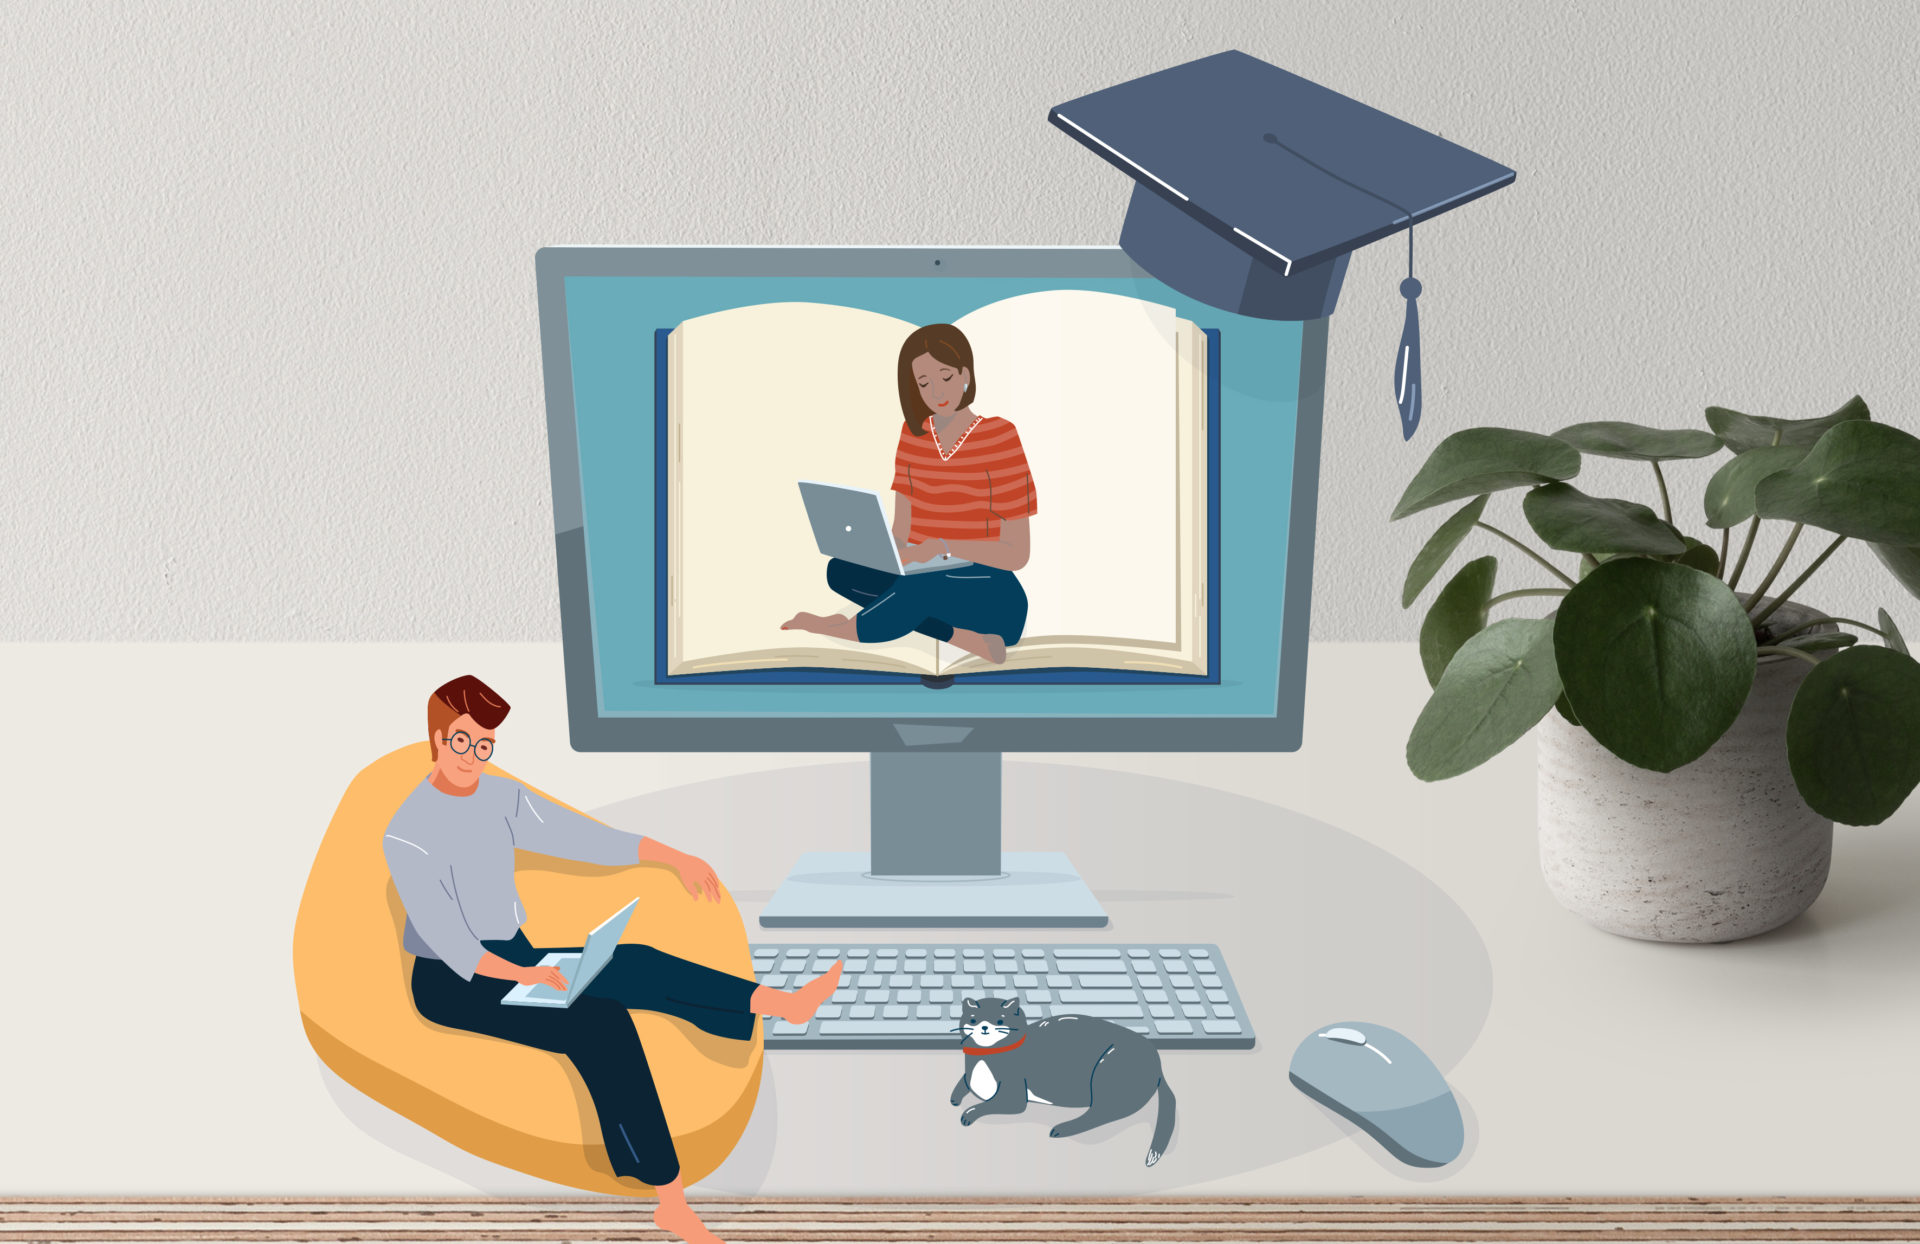 A computer with an image of a woman on a laptop. A man sits in front of the laptop on a beanbag. He is also studying on a laptop. A graduation cap sits on the computer and a cat sits next to the computer.